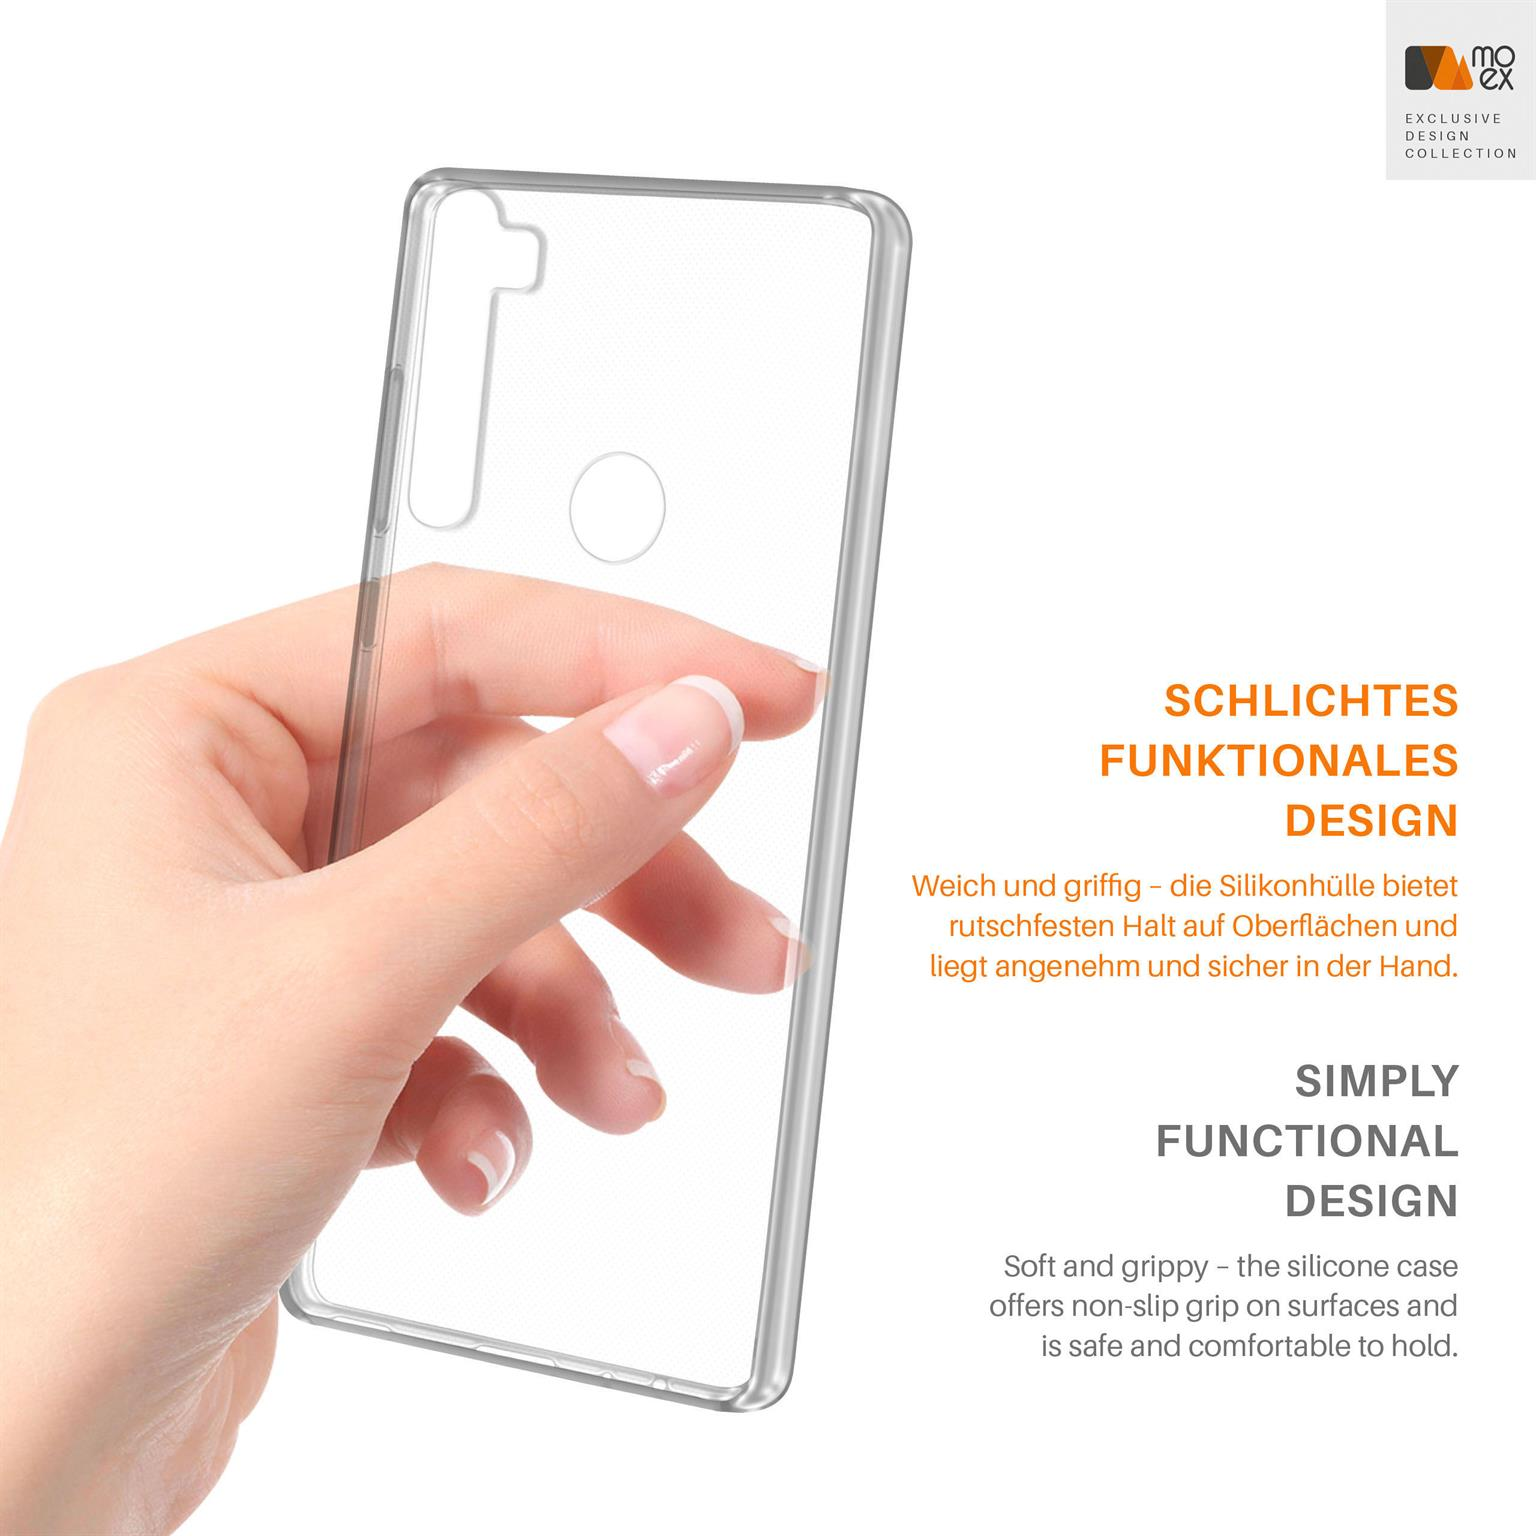 MOEX Aero Case, Backcover, Note 8, Xiaomi, Crystal-Clear Redmi